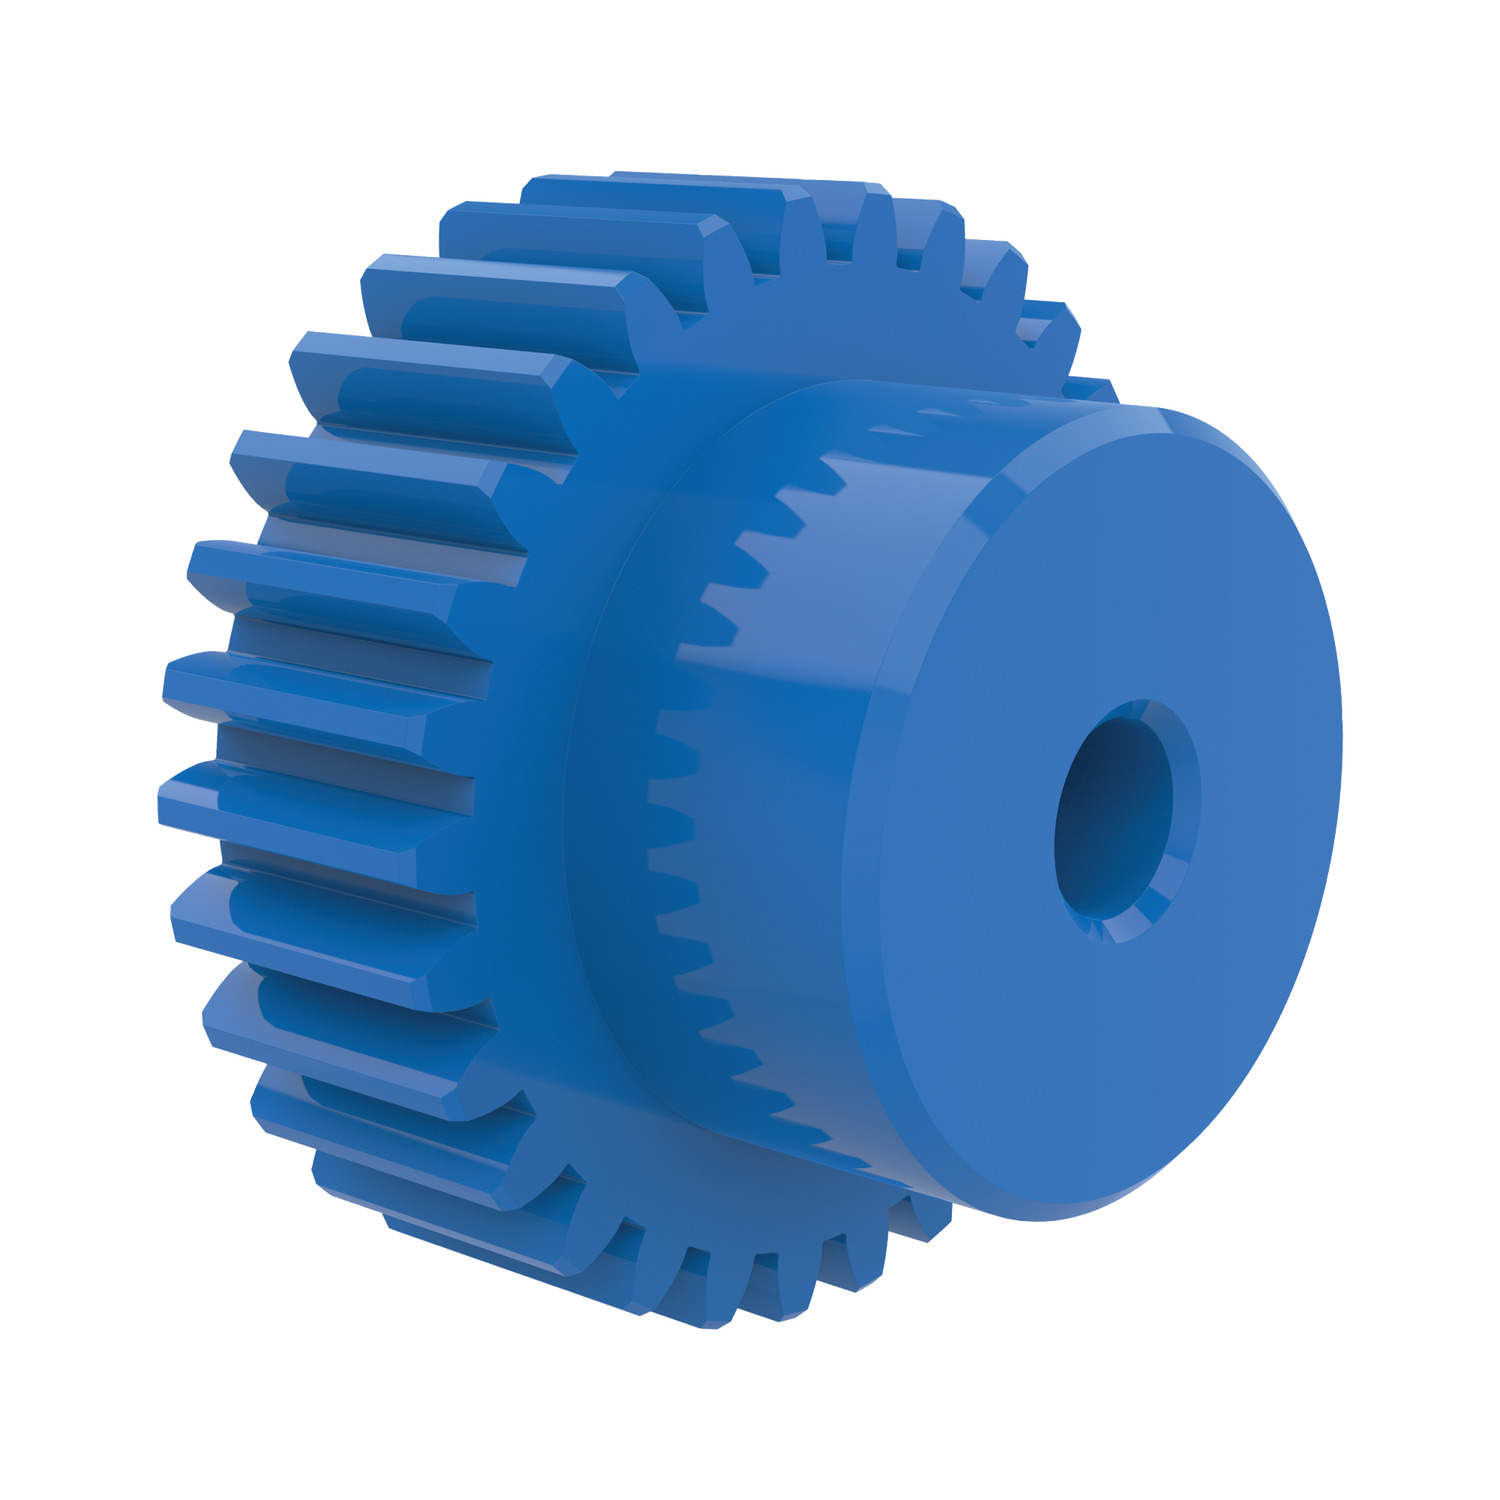 Spur Gears - Module 1.5 - Plastic Blue plastic Spur Gear made from machined polyacetal (POM; a thermoplastic) available in module sizes 0.8-1.5.